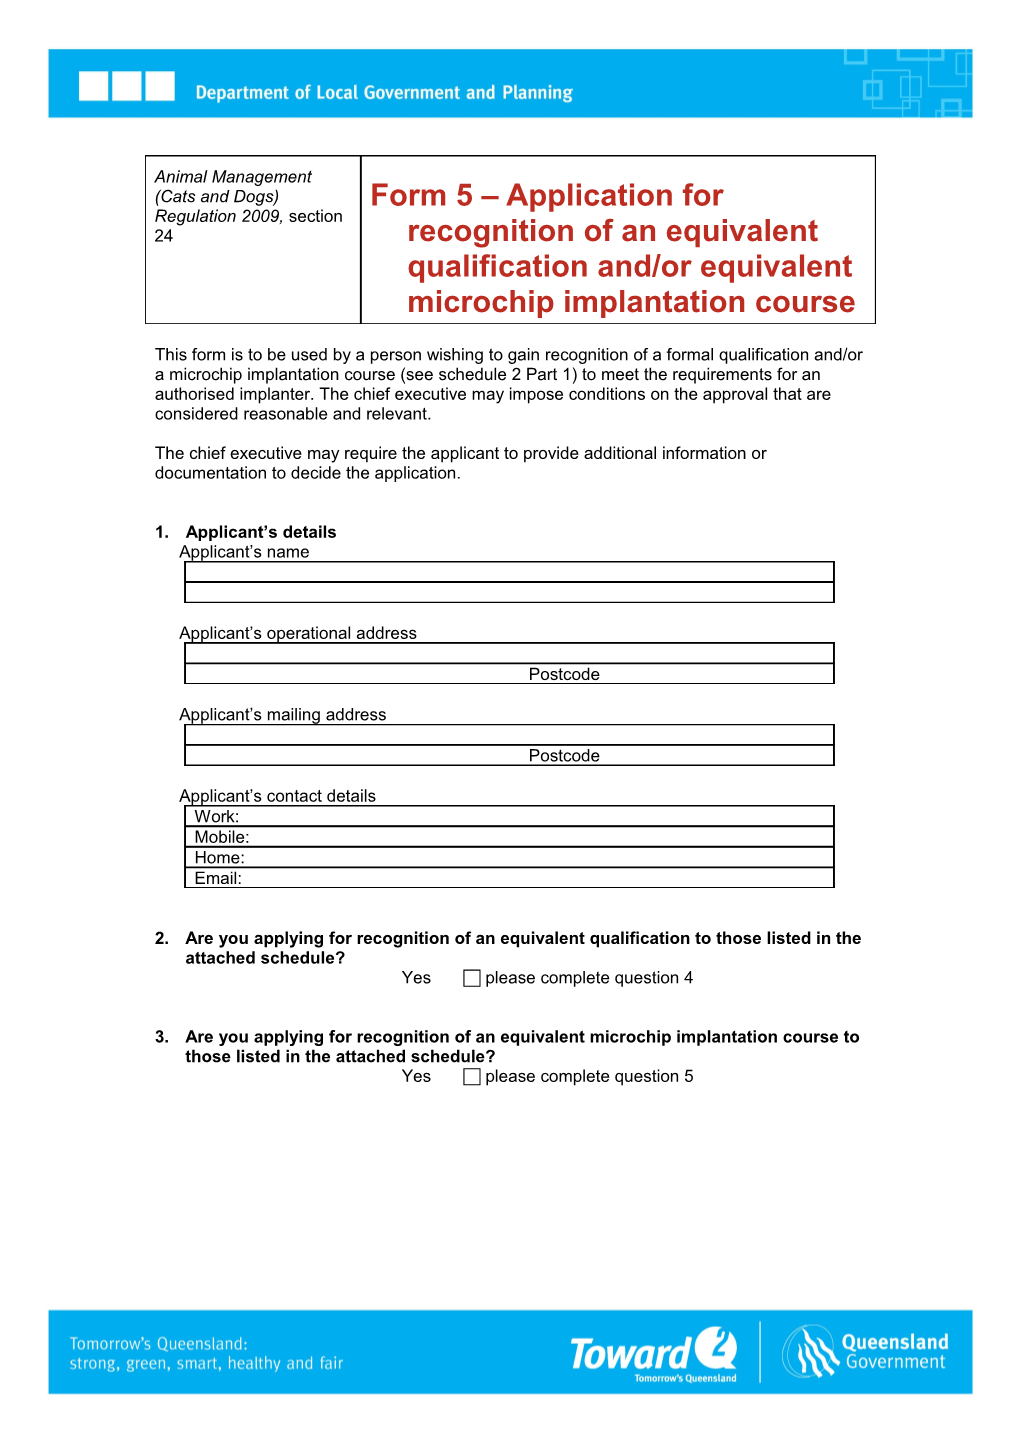 Application for Recognition of an Equivalent Qualification And/Or Equivalent Microchip